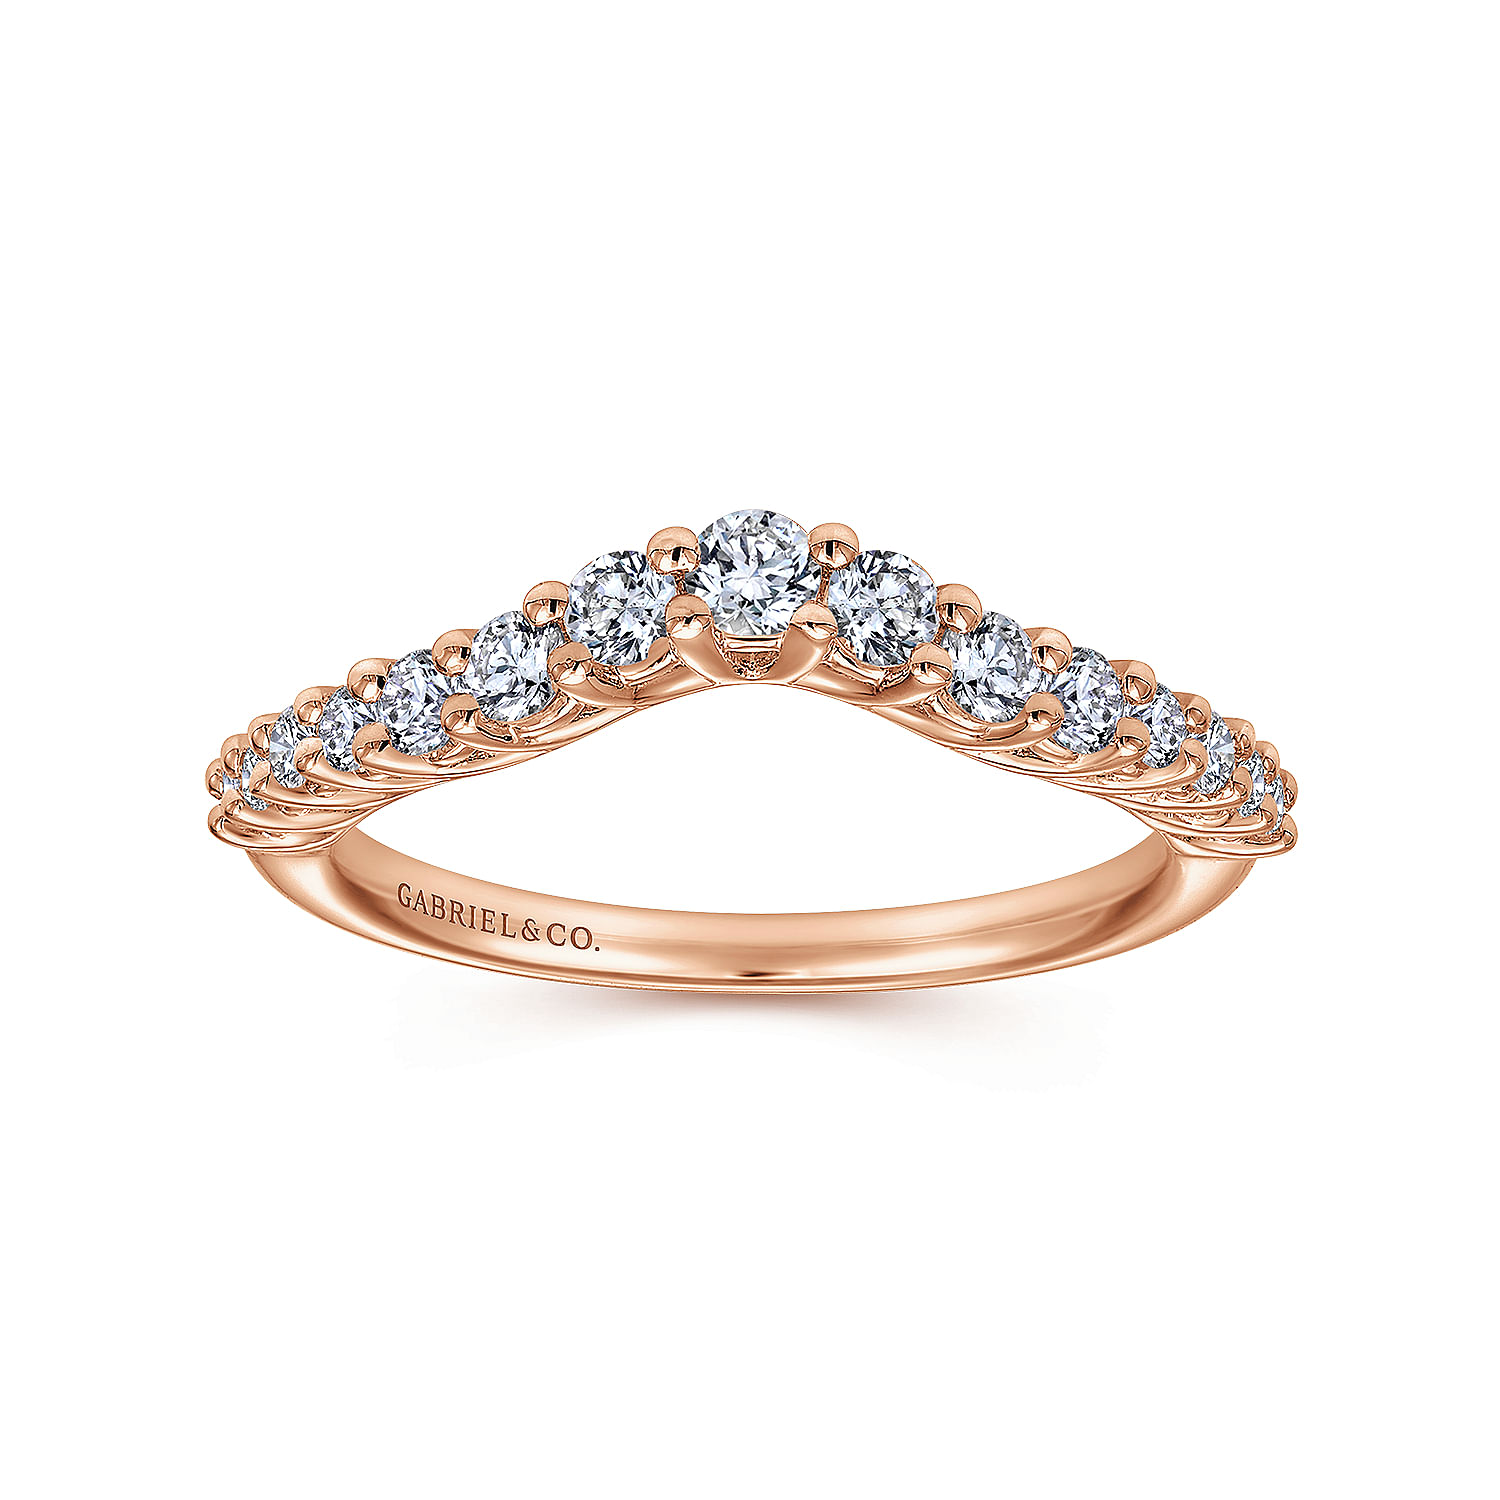 Curved 14K Rose Gold Shared Prong Diamond Wedding Band